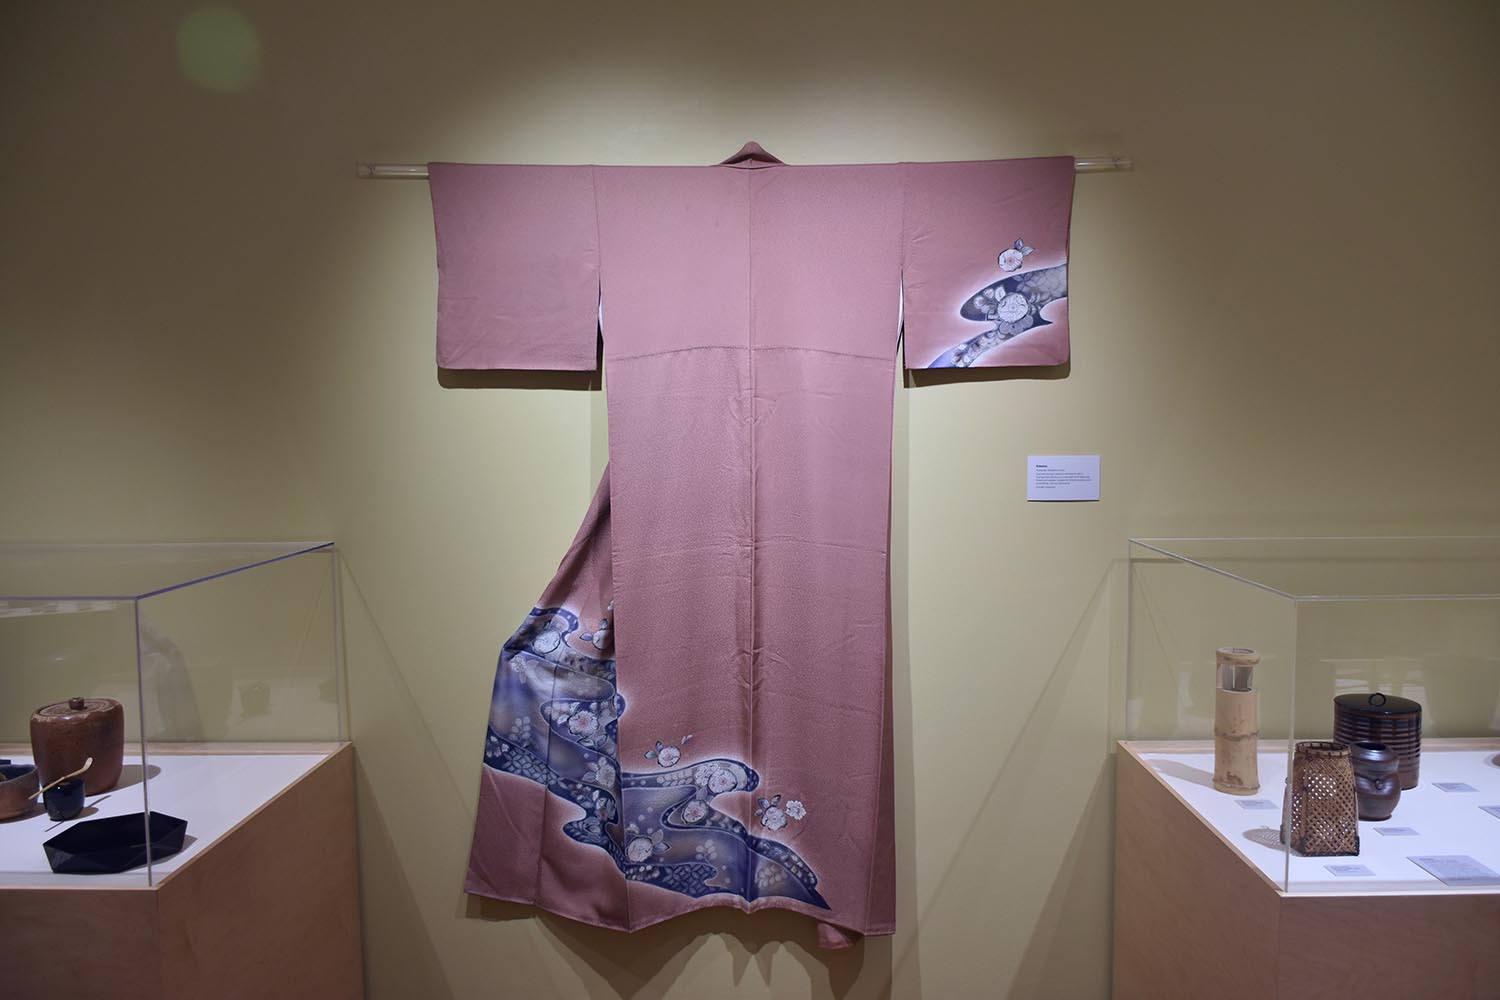 Included in the exhibit is a silk Tsukesage Tsujigahana style kimono, which is dyed and painted. The kimono is suitable to wear at formal occasions such as weddings and tea ceremonies. 